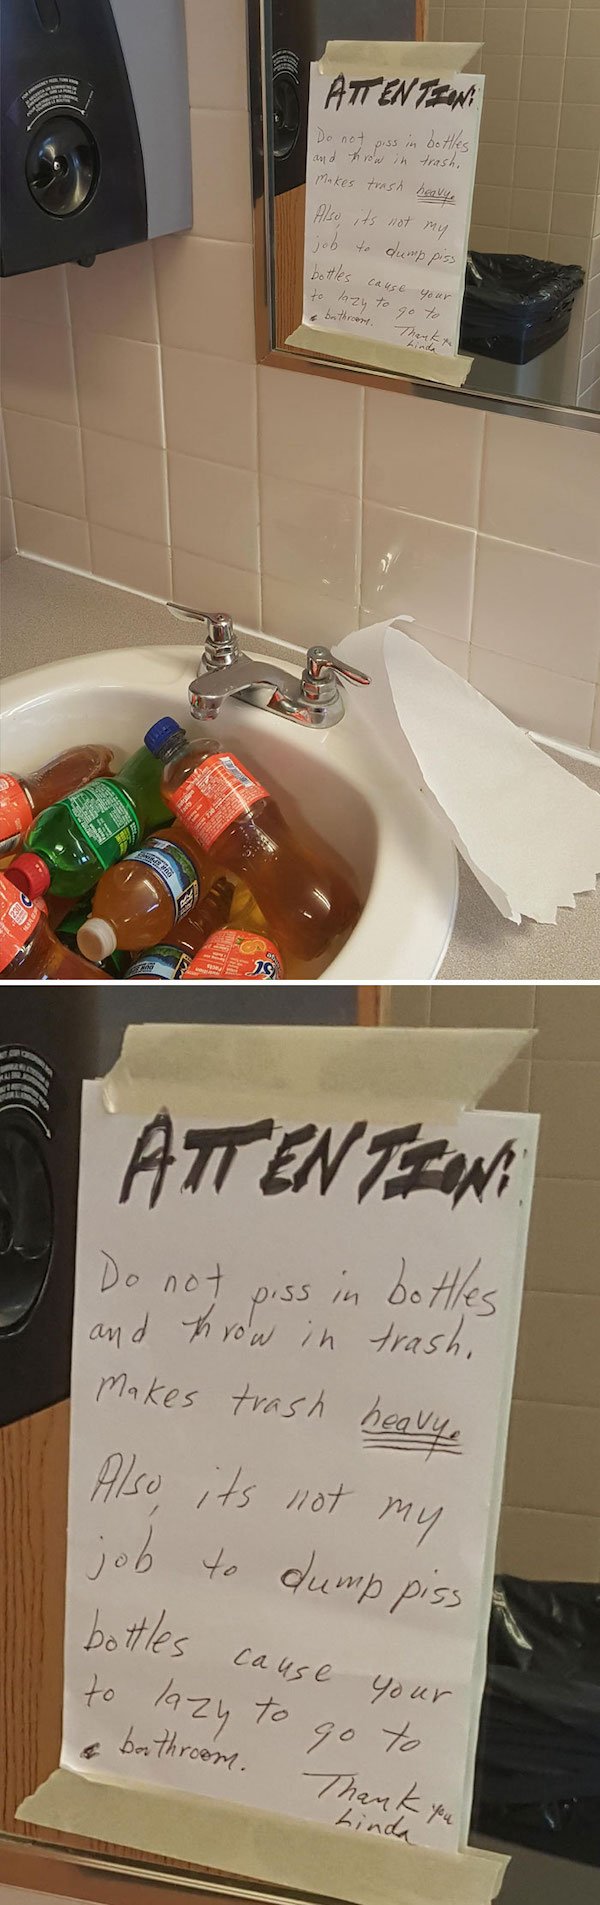 The People On My Floor - Attente Do not in trash, makes trash heavy Also, its not my to dump piss job I bottles cause your to lazy to go bathroom. Js Attentesin Do not and throw in trash, piss in bottles makes trash heavye | Also its not my job to dump pi